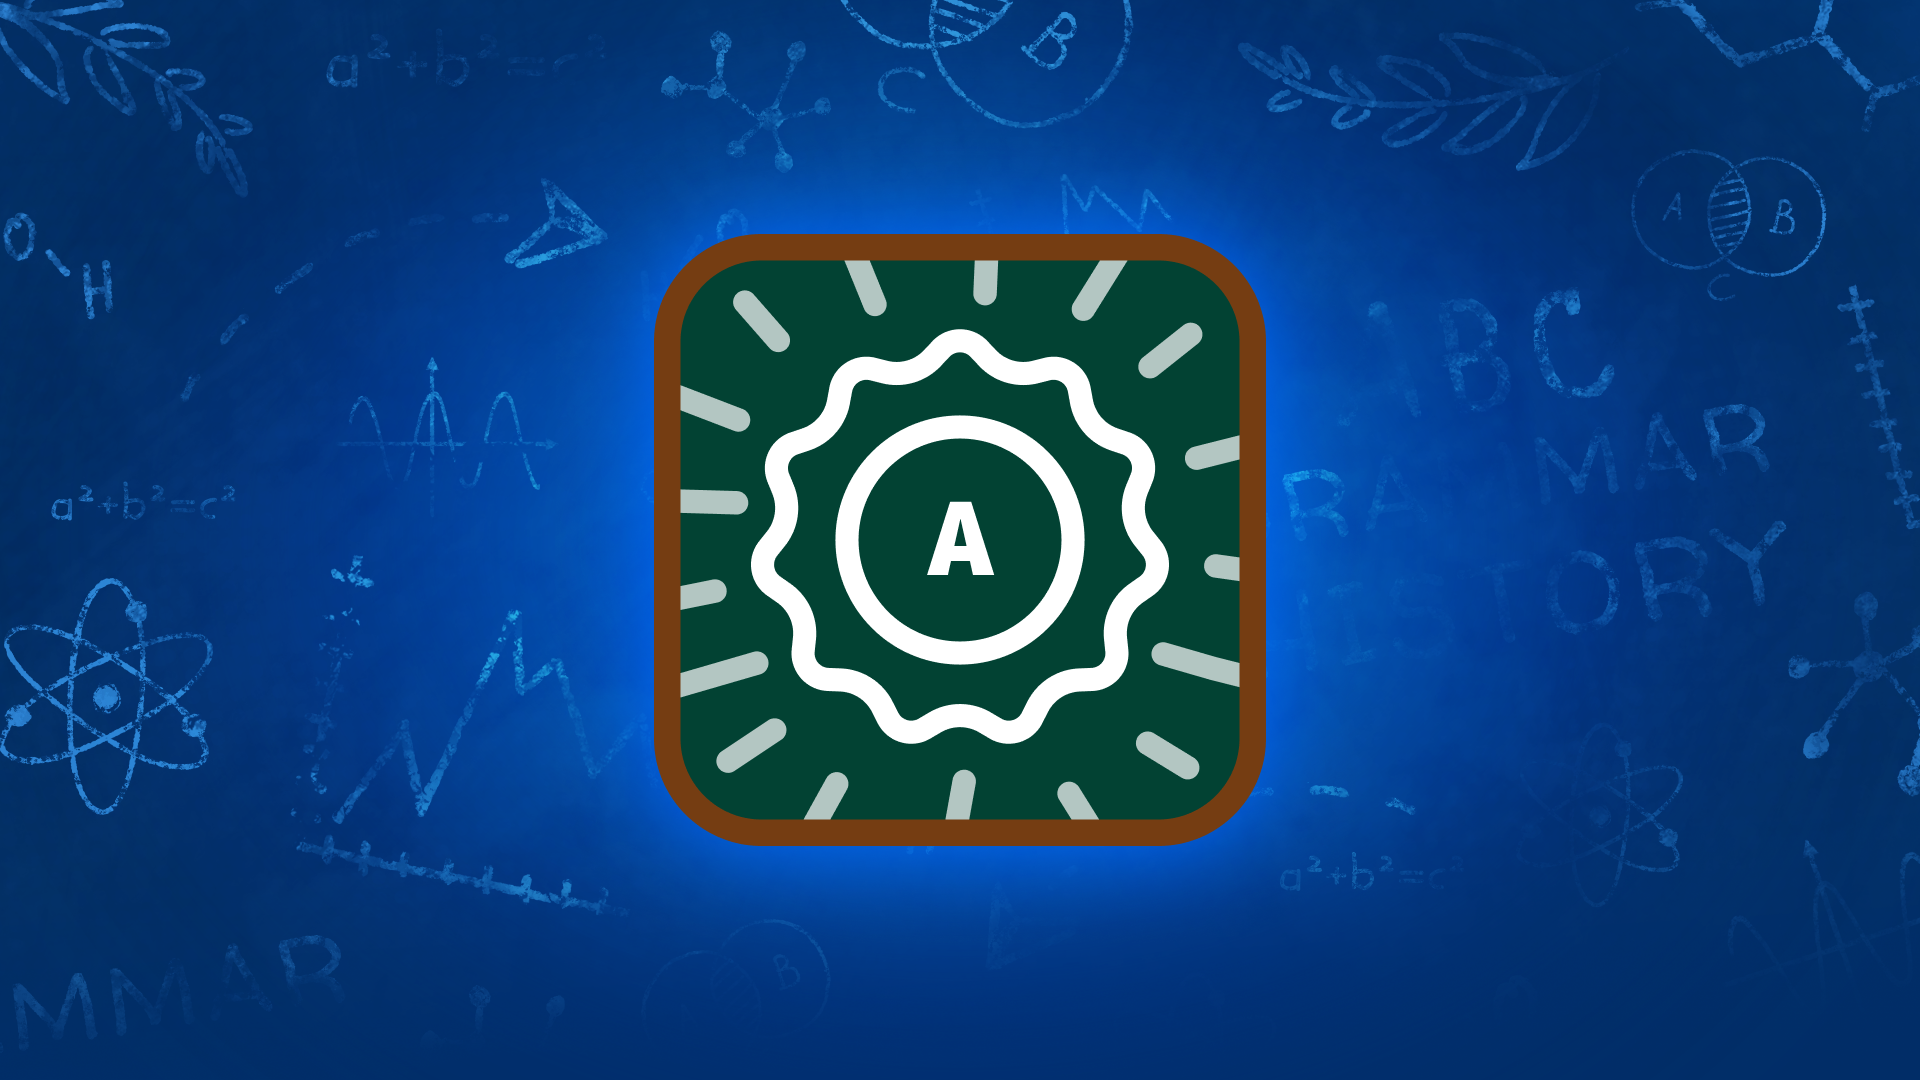 Icon for "A" Student